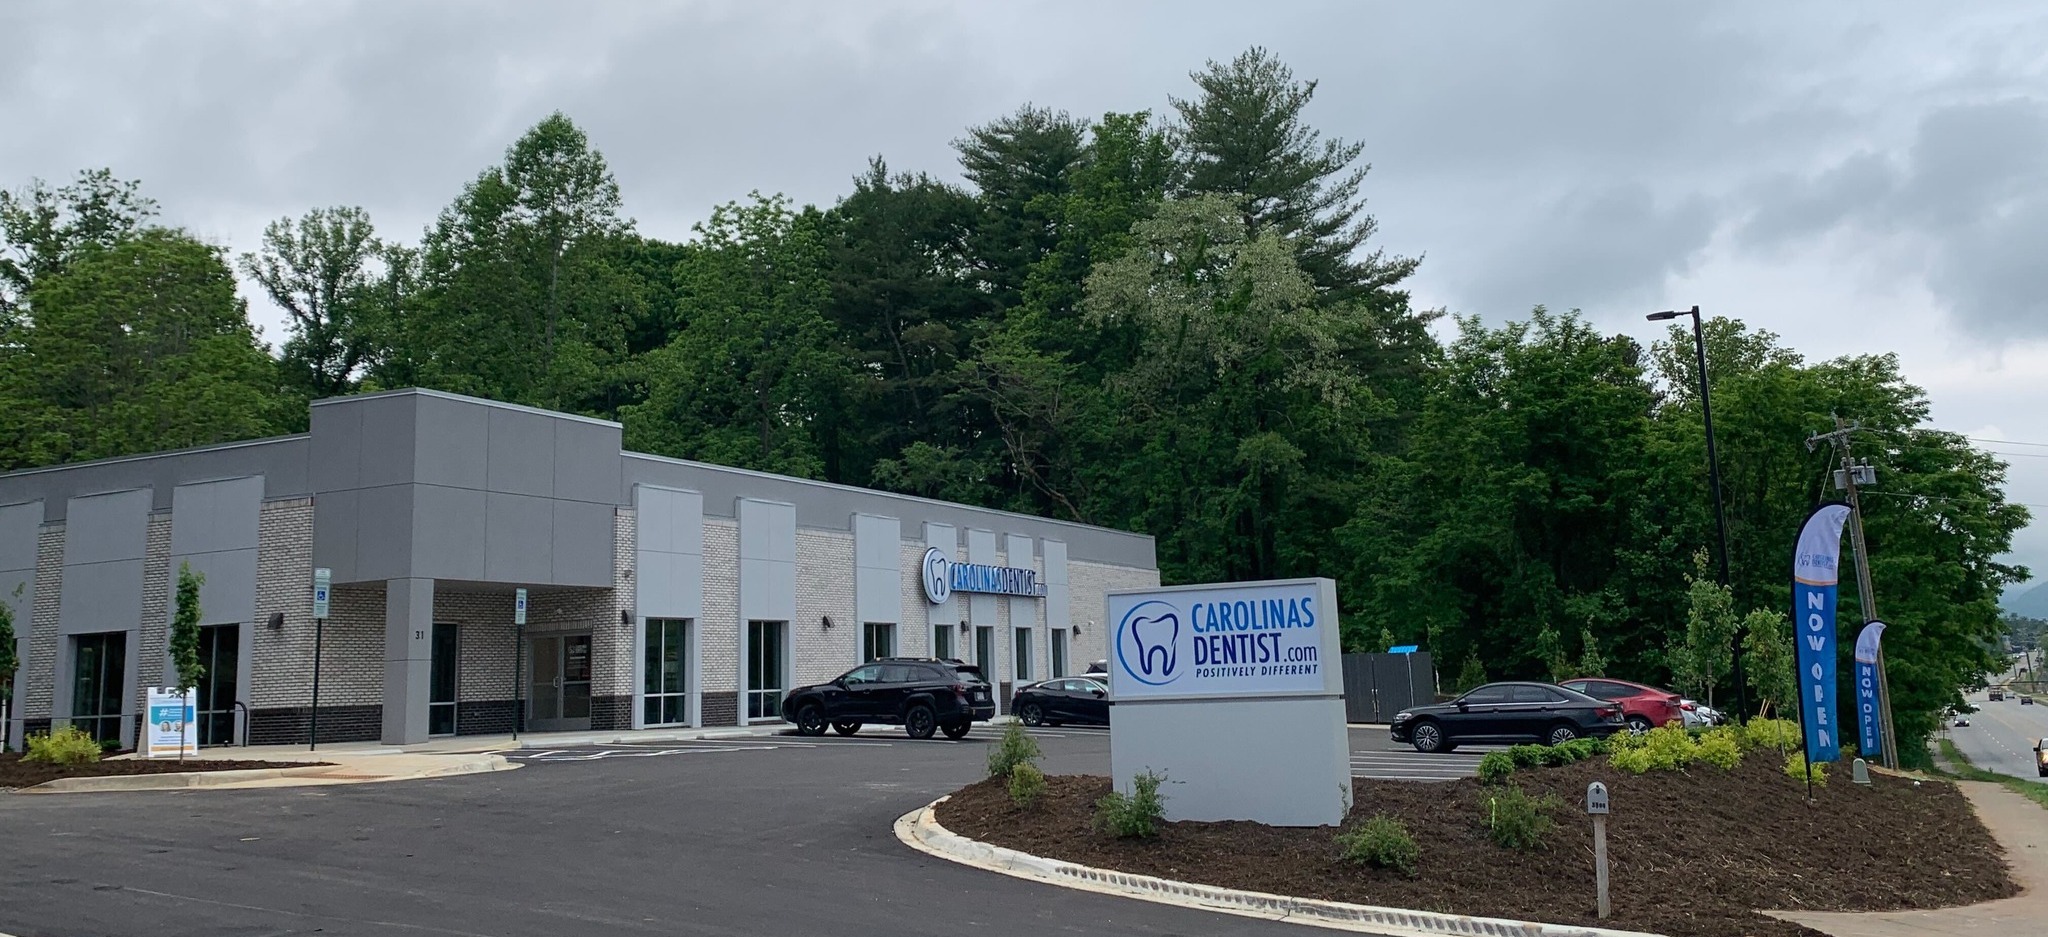 CarolinasDentist, a North Carolina-based dental practice, has opened a new office serving Asheville and the surrounding community.